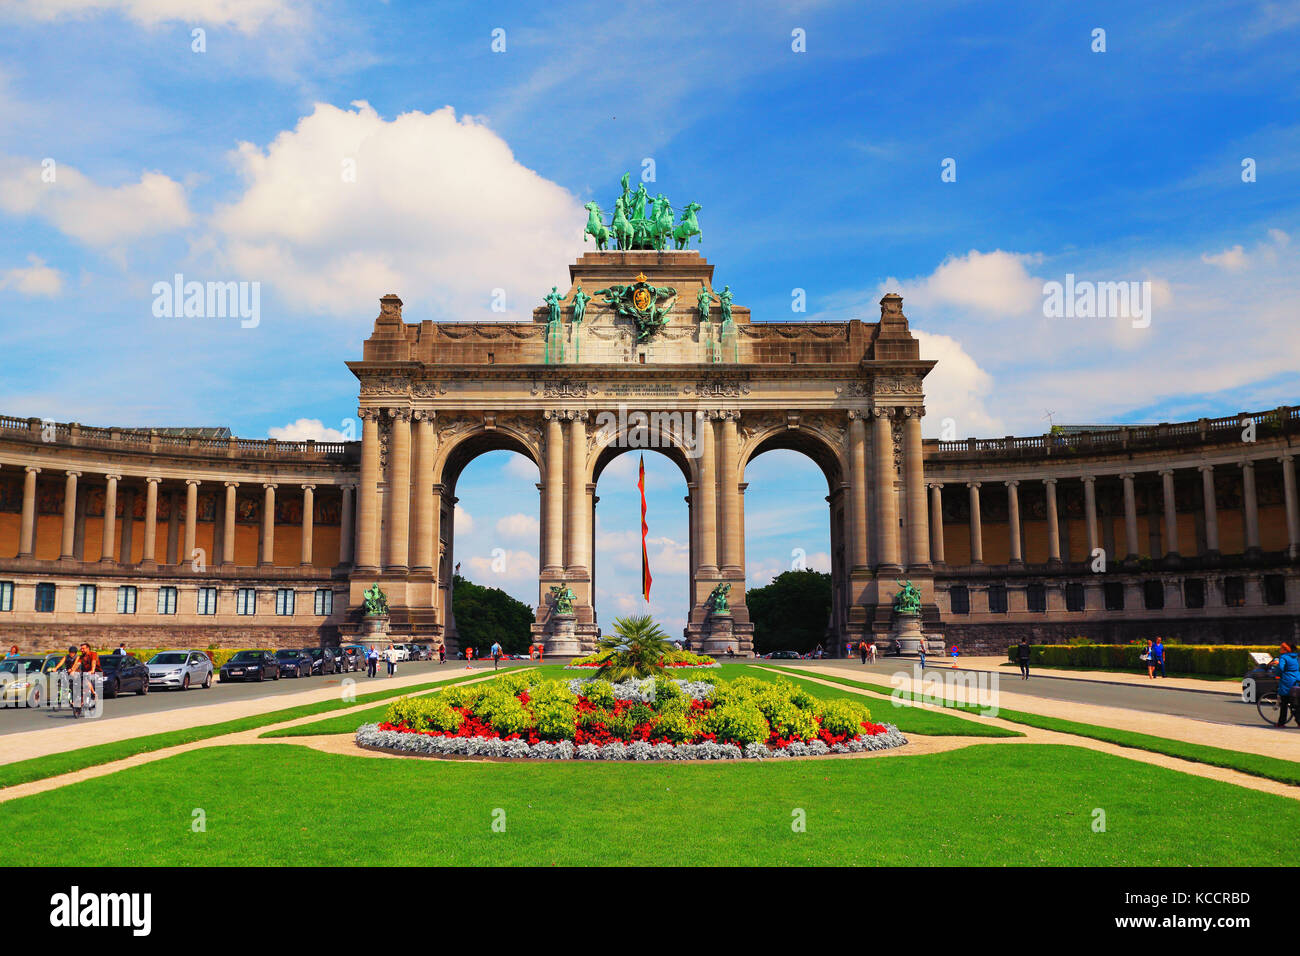 Brussels, Belgium - July 17, 2017: Parc du Cinquantenaire in Brussels on a sunny day. Famous attraction of Belgium. Stock Photo